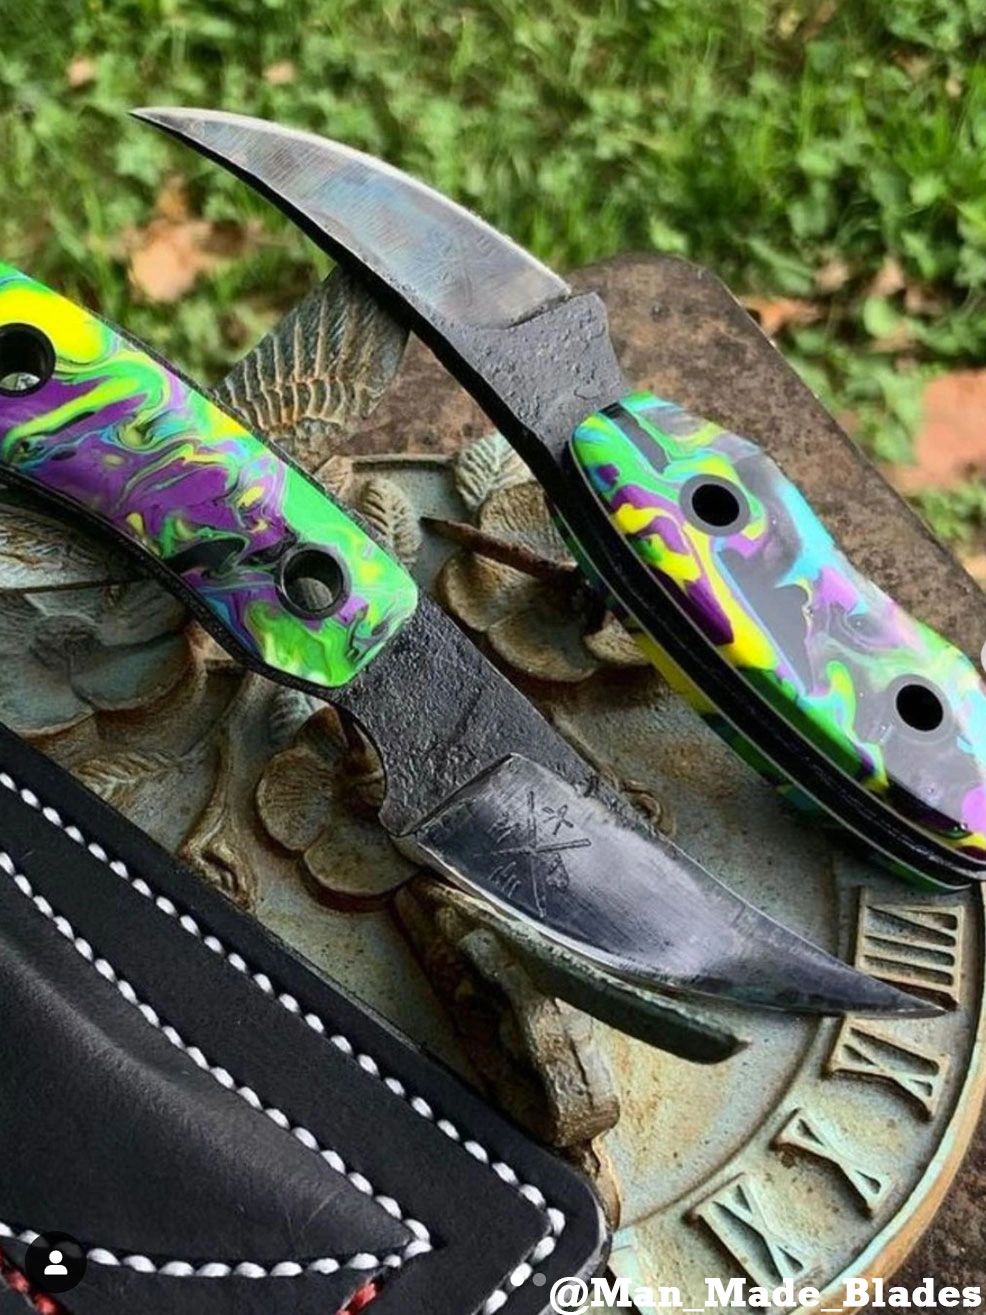 https://img1.wsimg.com/isteam/ip/4cc1cb2e-e3e6-439e-a752-ea2d6876ee62/man-made-blades-with-kaotic-artworks-handles.jpg